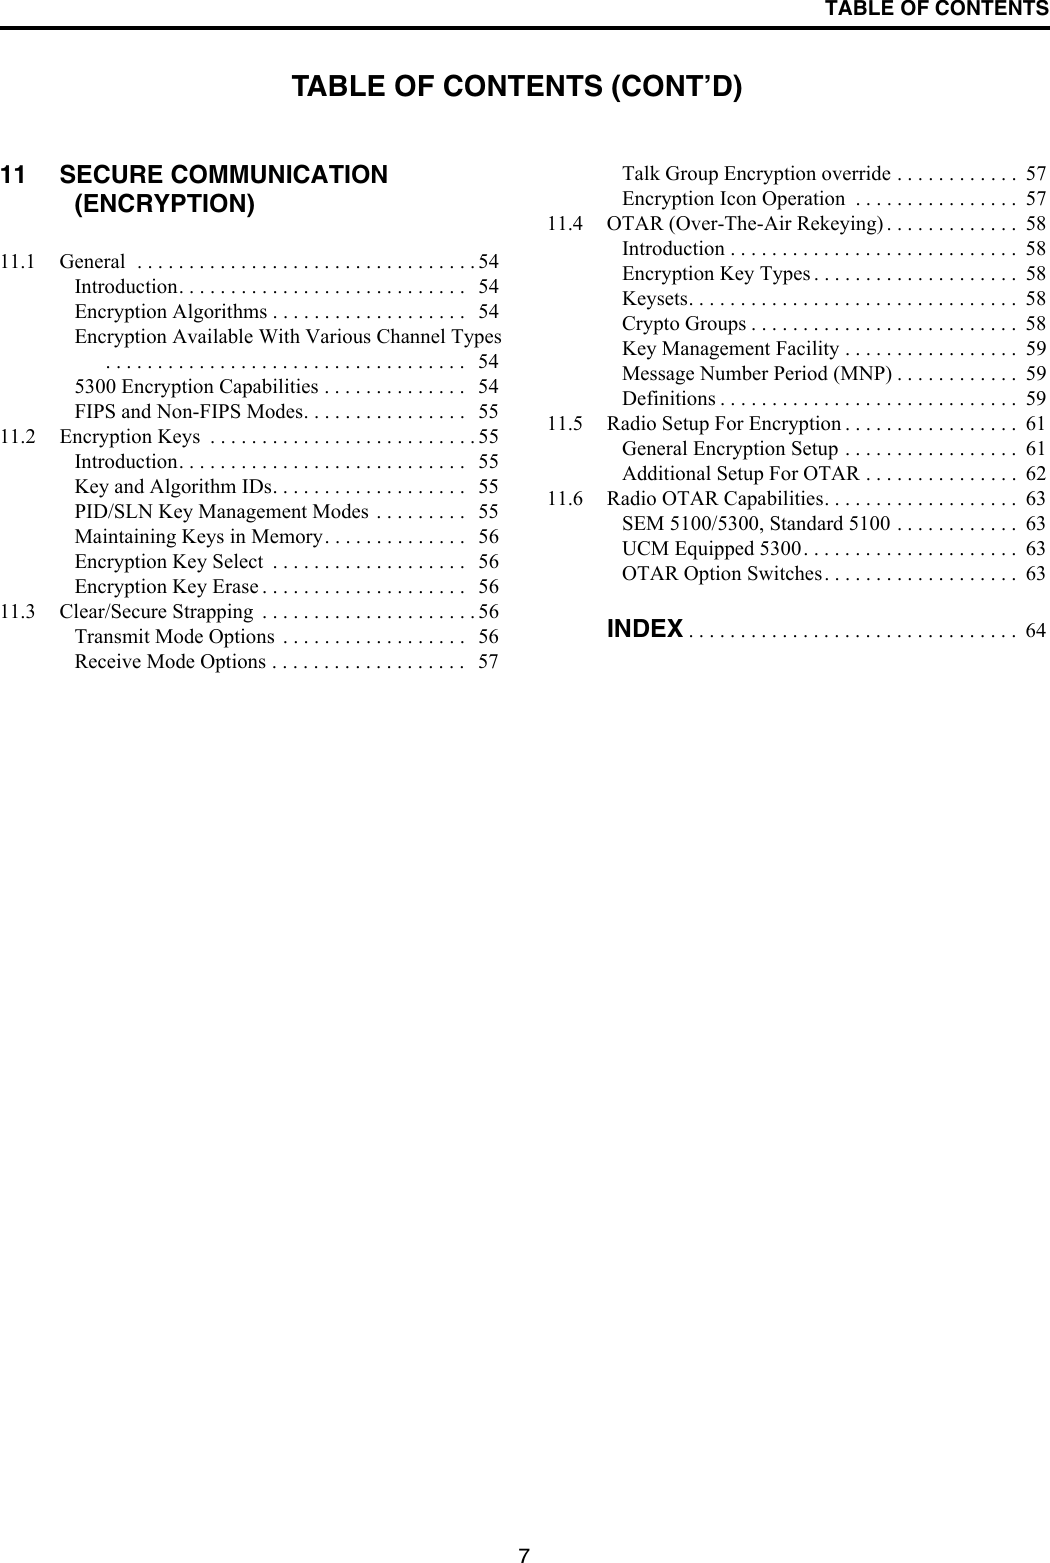 TABLE OF CONTENTS711 SECURE COMMUNICATION (ENCRYPTION)11.1 General  . . . . . . . . . . . . . . . . . . . . . . . . . . . . . . . . . 54Introduction. . . . . . . . . . . . . . . . . . . . . . . . . . . .   54Encryption Algorithms . . . . . . . . . . . . . . . . . . .   54Encryption Available With Various Channel Types . . . . . . . . . . . . . . . . . . . . . . . . . . . . . . . . . . .   545300 Encryption Capabilities . . . . . . . . . . . . . .   54FIPS and Non-FIPS Modes. . . . . . . . . . . . . . . .   5511.2 Encryption Keys  . . . . . . . . . . . . . . . . . . . . . . . . . . 55Introduction. . . . . . . . . . . . . . . . . . . . . . . . . . . .   55Key and Algorithm IDs. . . . . . . . . . . . . . . . . . .   55PID/SLN Key Management Modes . . . . . . . . .   55Maintaining Keys in Memory. . . . . . . . . . . . . .   56Encryption Key Select  . . . . . . . . . . . . . . . . . . .   56Encryption Key Erase . . . . . . . . . . . . . . . . . . . .   5611.3 Clear/Secure Strapping  . . . . . . . . . . . . . . . . . . . . . 56Transmit Mode Options  . . . . . . . . . . . . . . . . . .   56Receive Mode Options . . . . . . . . . . . . . . . . . . .   57Talk Group Encryption override . . . . . . . . . . . .  57Encryption Icon Operation  . . . . . . . . . . . . . . . .  5711.4 OTAR (Over-The-Air Rekeying) . . . . . . . . . . . . .  58Introduction . . . . . . . . . . . . . . . . . . . . . . . . . . . .  58Encryption Key Types . . . . . . . . . . . . . . . . . . . .  58Keysets. . . . . . . . . . . . . . . . . . . . . . . . . . . . . . . .  58Crypto Groups . . . . . . . . . . . . . . . . . . . . . . . . . .  58Key Management Facility . . . . . . . . . . . . . . . . .  59Message Number Period (MNP) . . . . . . . . . . . .  59Definitions . . . . . . . . . . . . . . . . . . . . . . . . . . . . .  5911.5 Radio Setup For Encryption . . . . . . . . . . . . . . . . .  61General Encryption Setup . . . . . . . . . . . . . . . . .  61Additional Setup For OTAR . . . . . . . . . . . . . . .  6211.6 Radio OTAR Capabilities. . . . . . . . . . . . . . . . . . .  63SEM 5100/5300, Standard 5100 . . . . . . . . . . . .  63UCM Equipped 5300. . . . . . . . . . . . . . . . . . . . .  63OTAR Option Switches. . . . . . . . . . . . . . . . . . .  63INDEX . . . . . . . . . . . . . . . . . . . . . . . . . . . . . . . .  64TABLE OF CONTENTS (CONT’D)